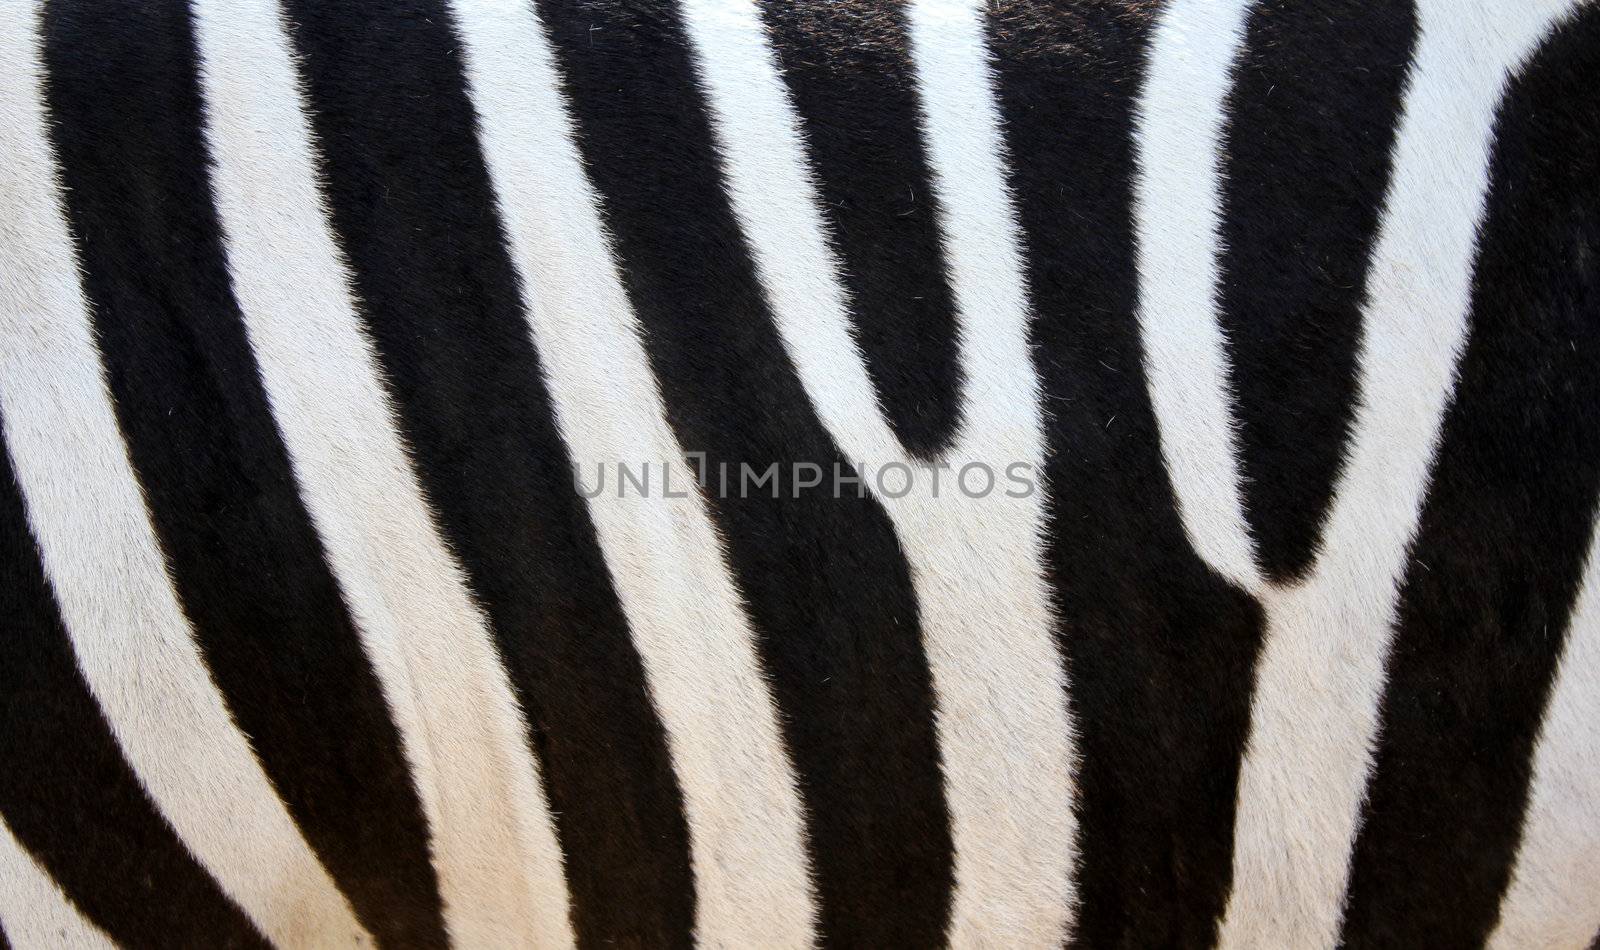 detail of the skin of a zebra